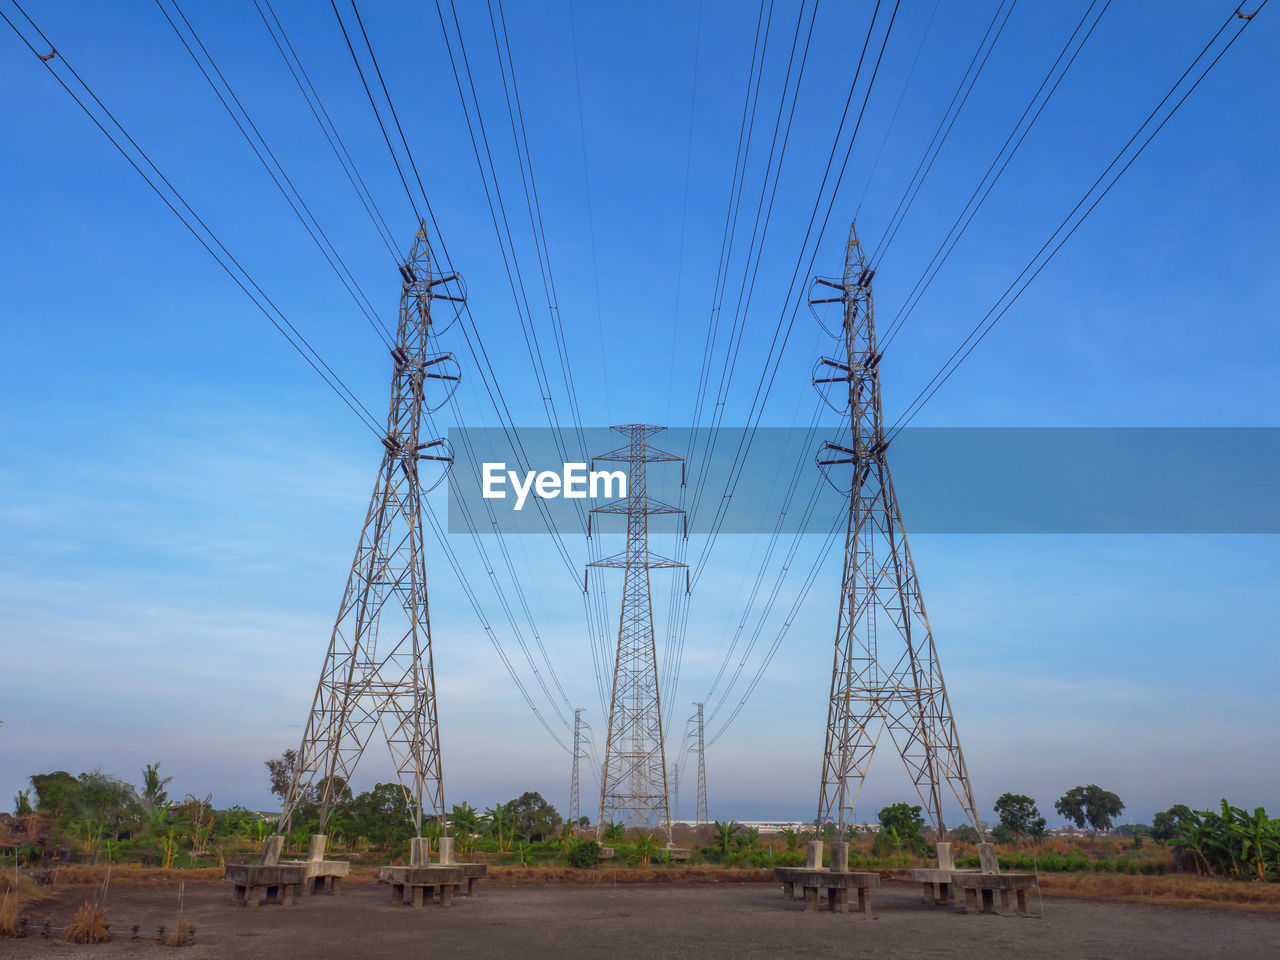 High voltage transmission towers with electricity power line over blue sky and white cloud